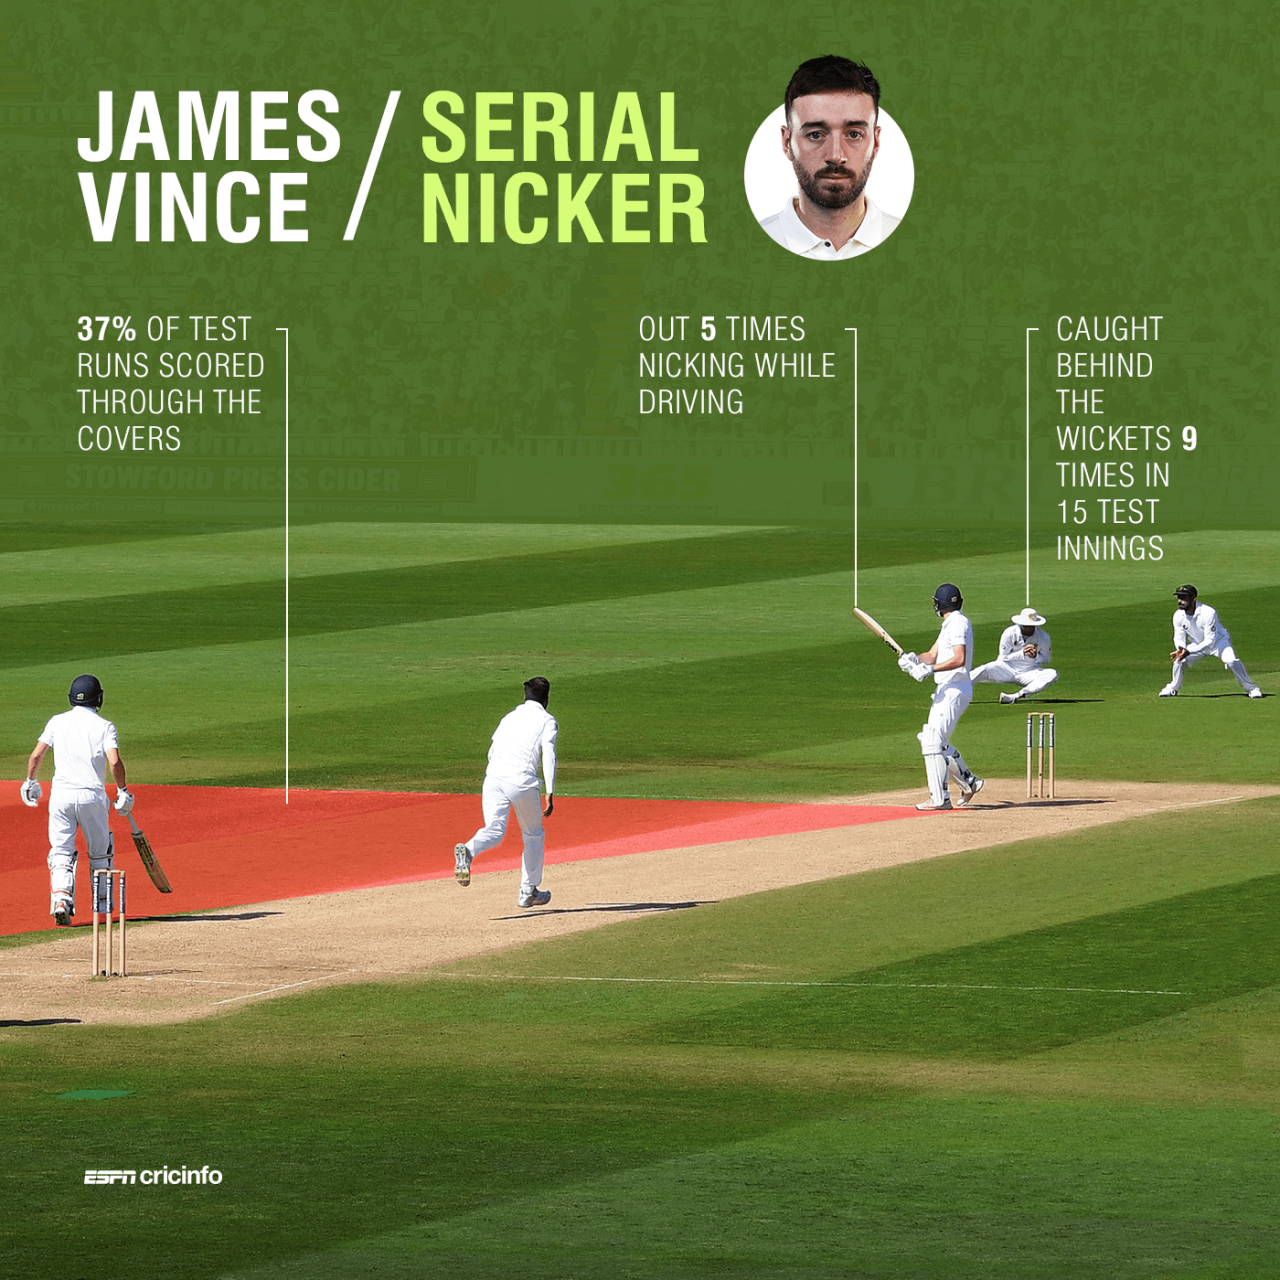 James Vince has nicked off in 8 of his last 10 Test innings